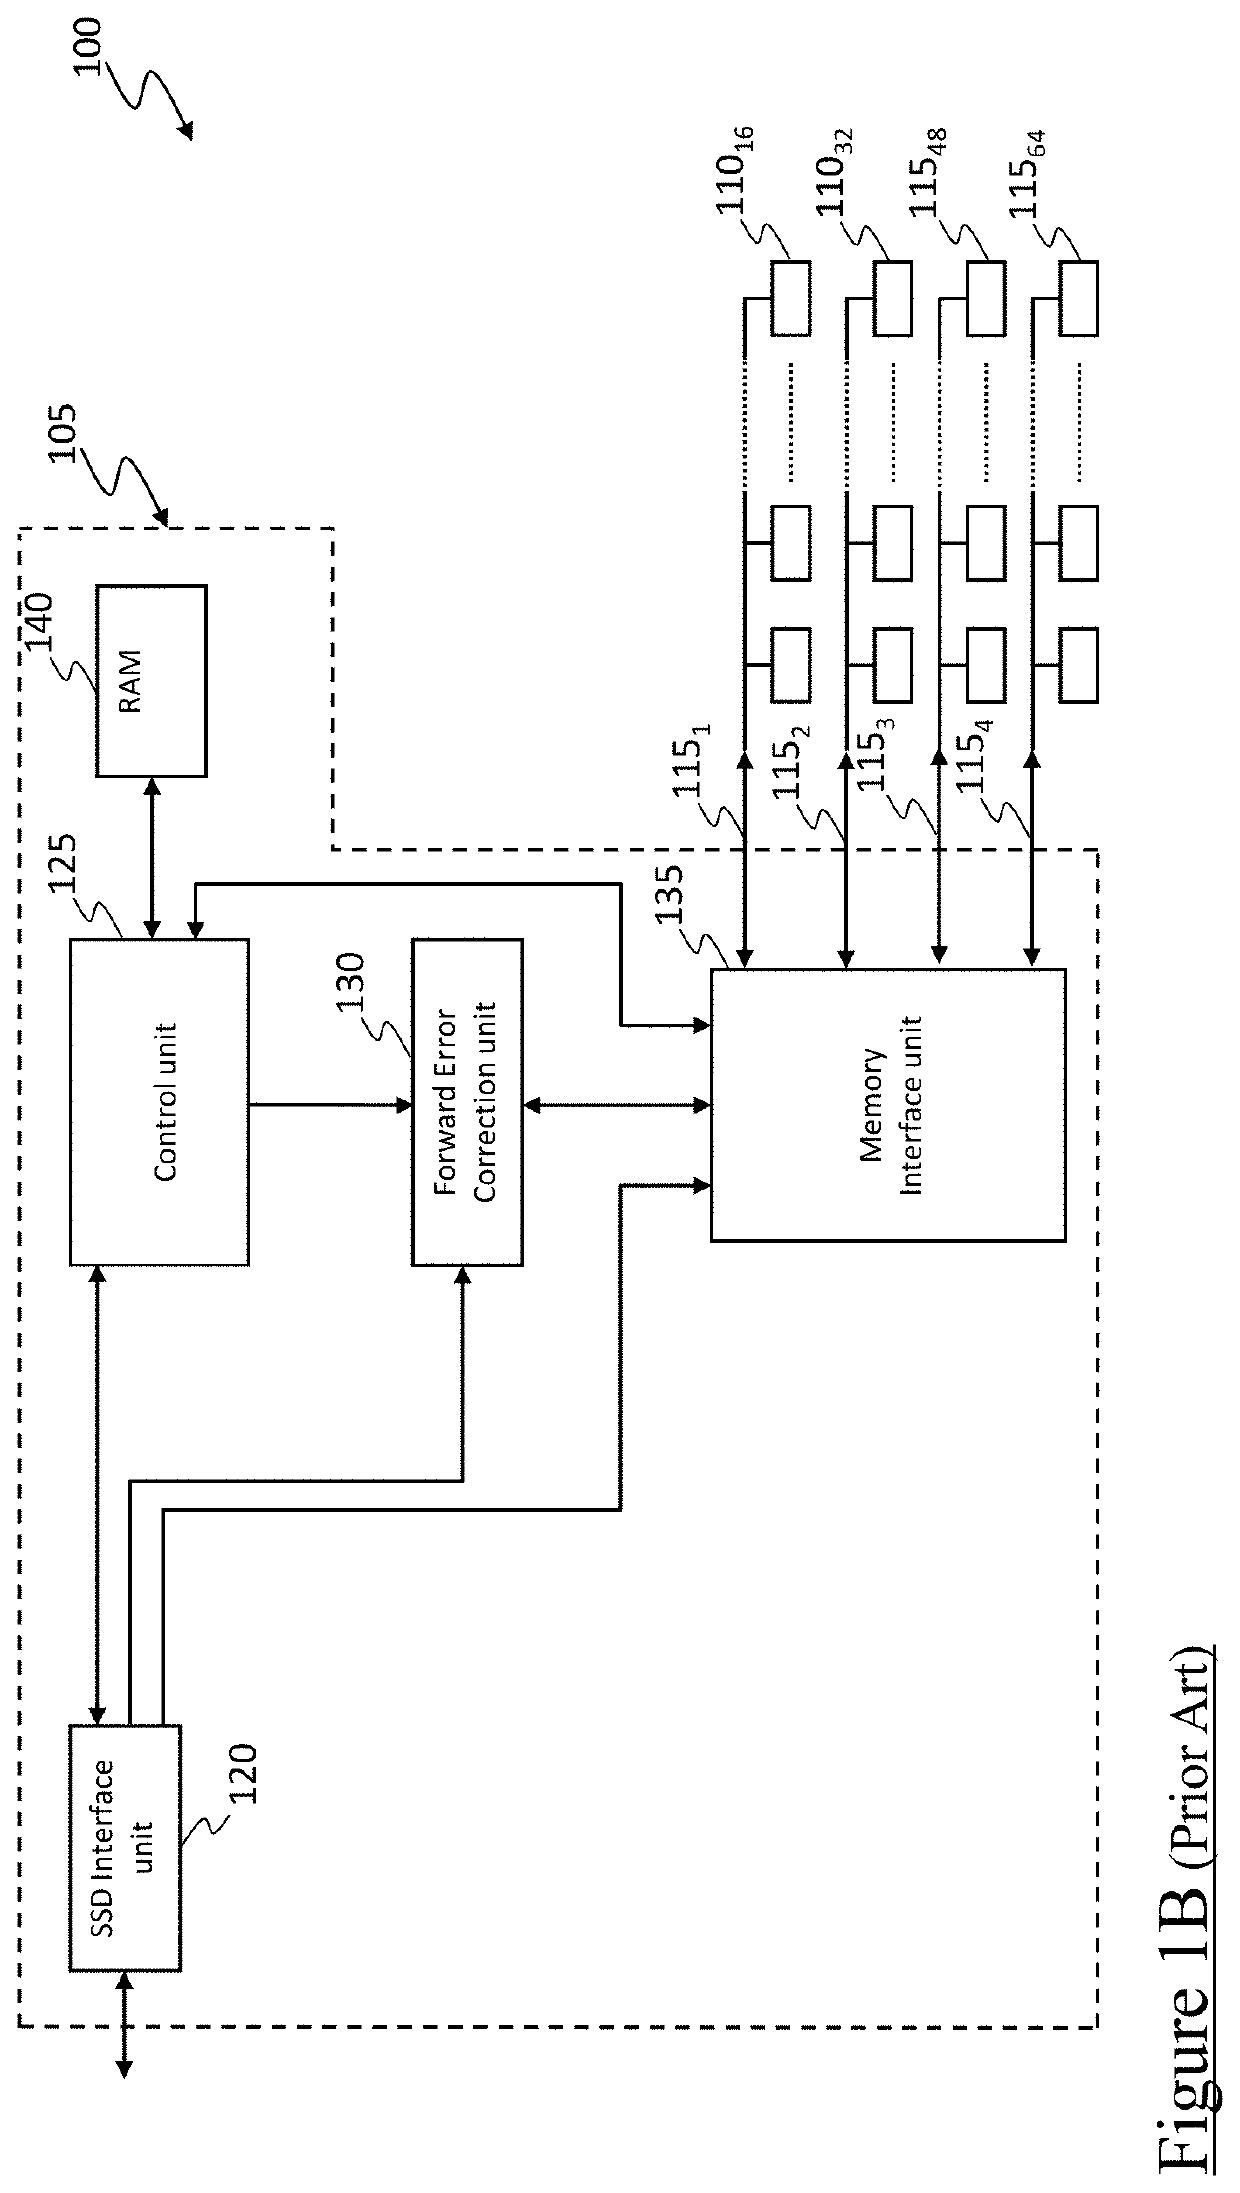 Solid state drive implementing polar encoding and successive cancellation list decoding